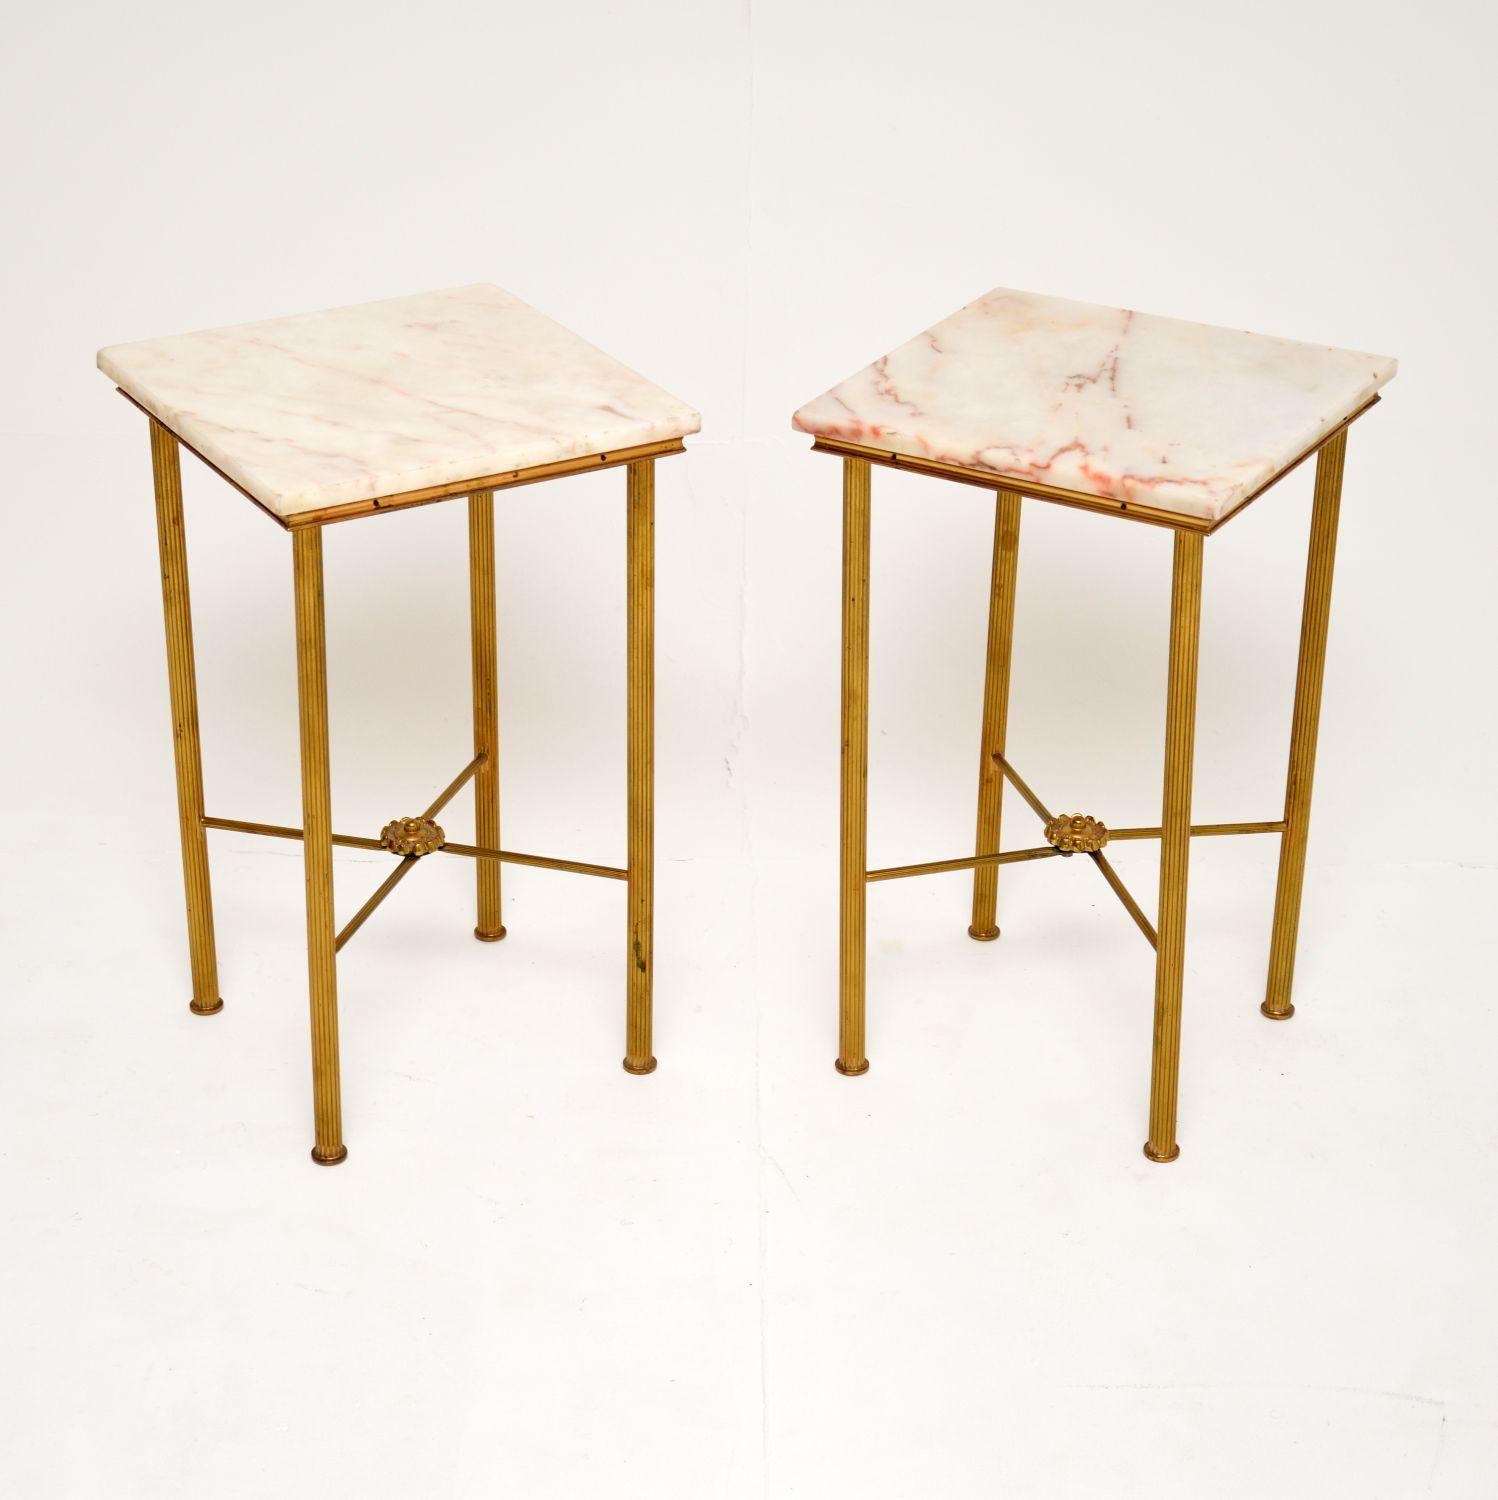 A beautiful pair of brass side tables with fixed marble tops. These were made in France, they date from around the 1960-70’s.

They are very well made and are a lovely, compact size. The solid brass frames have fluted legs and stretchered bases,